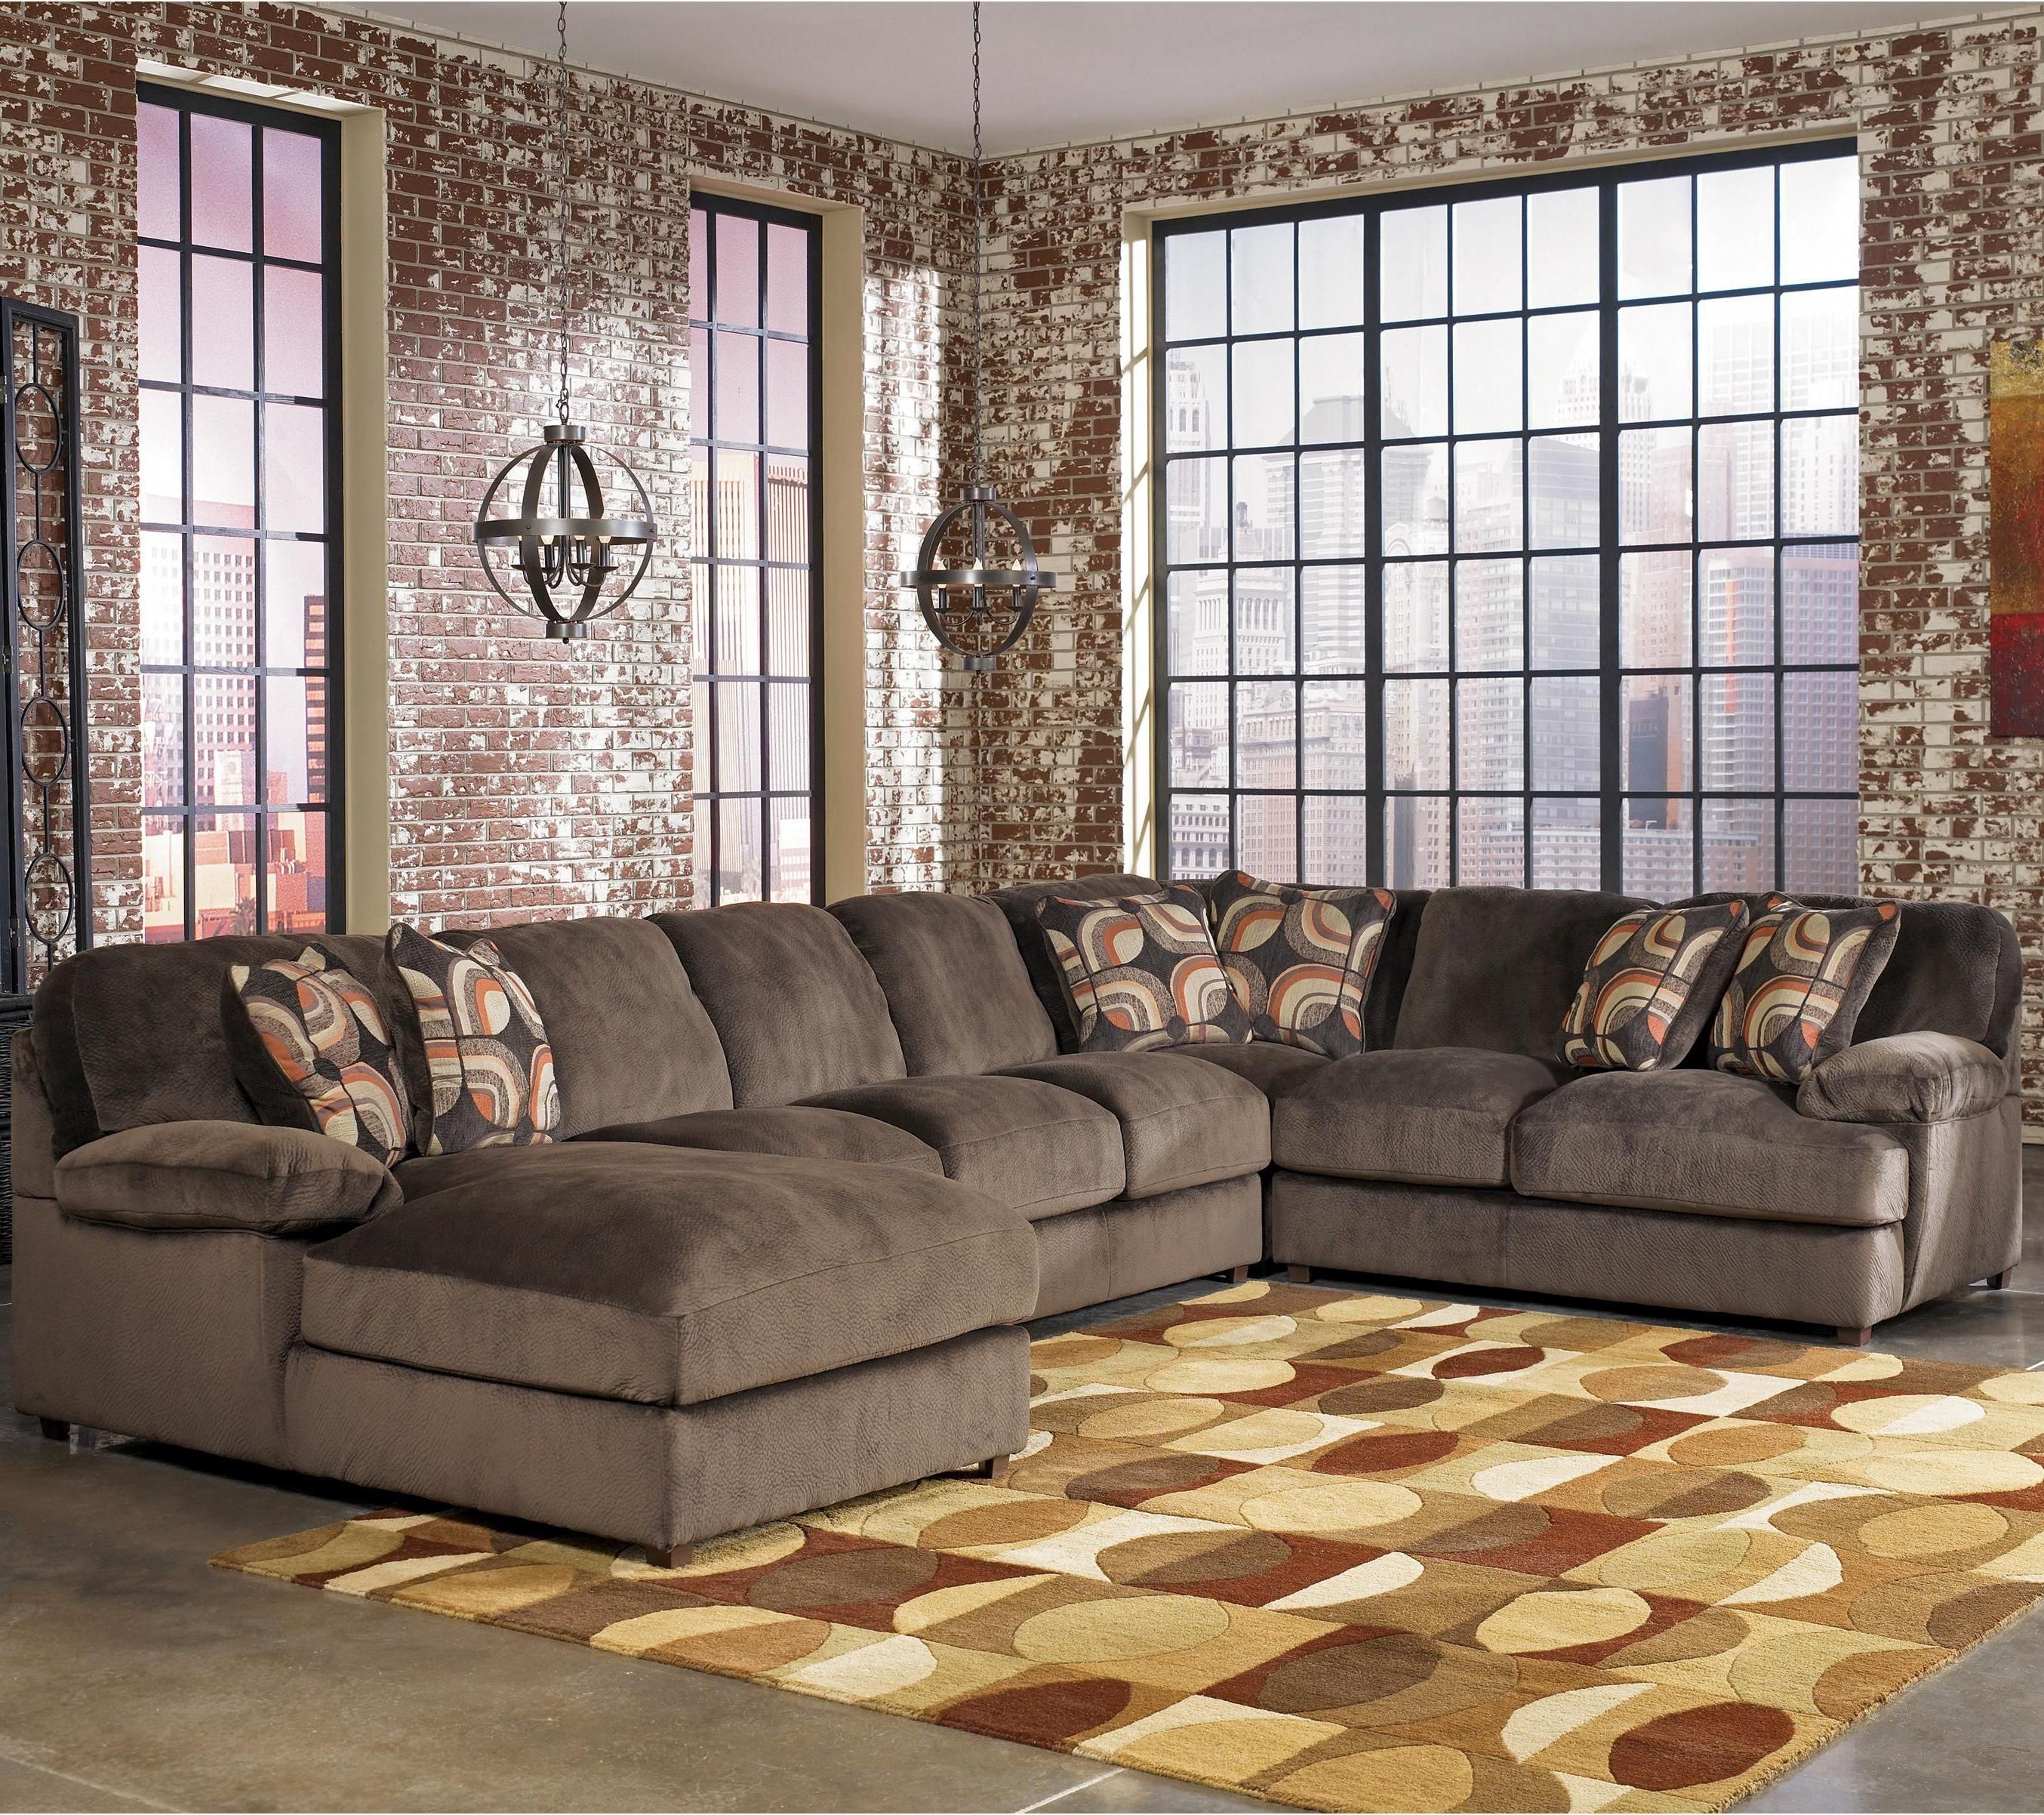 Signature Designashley Truscotti – Cafe Contemporary 4 Piece Intended For Peterborough Ontario Sectional Sofas (View 9 of 10)